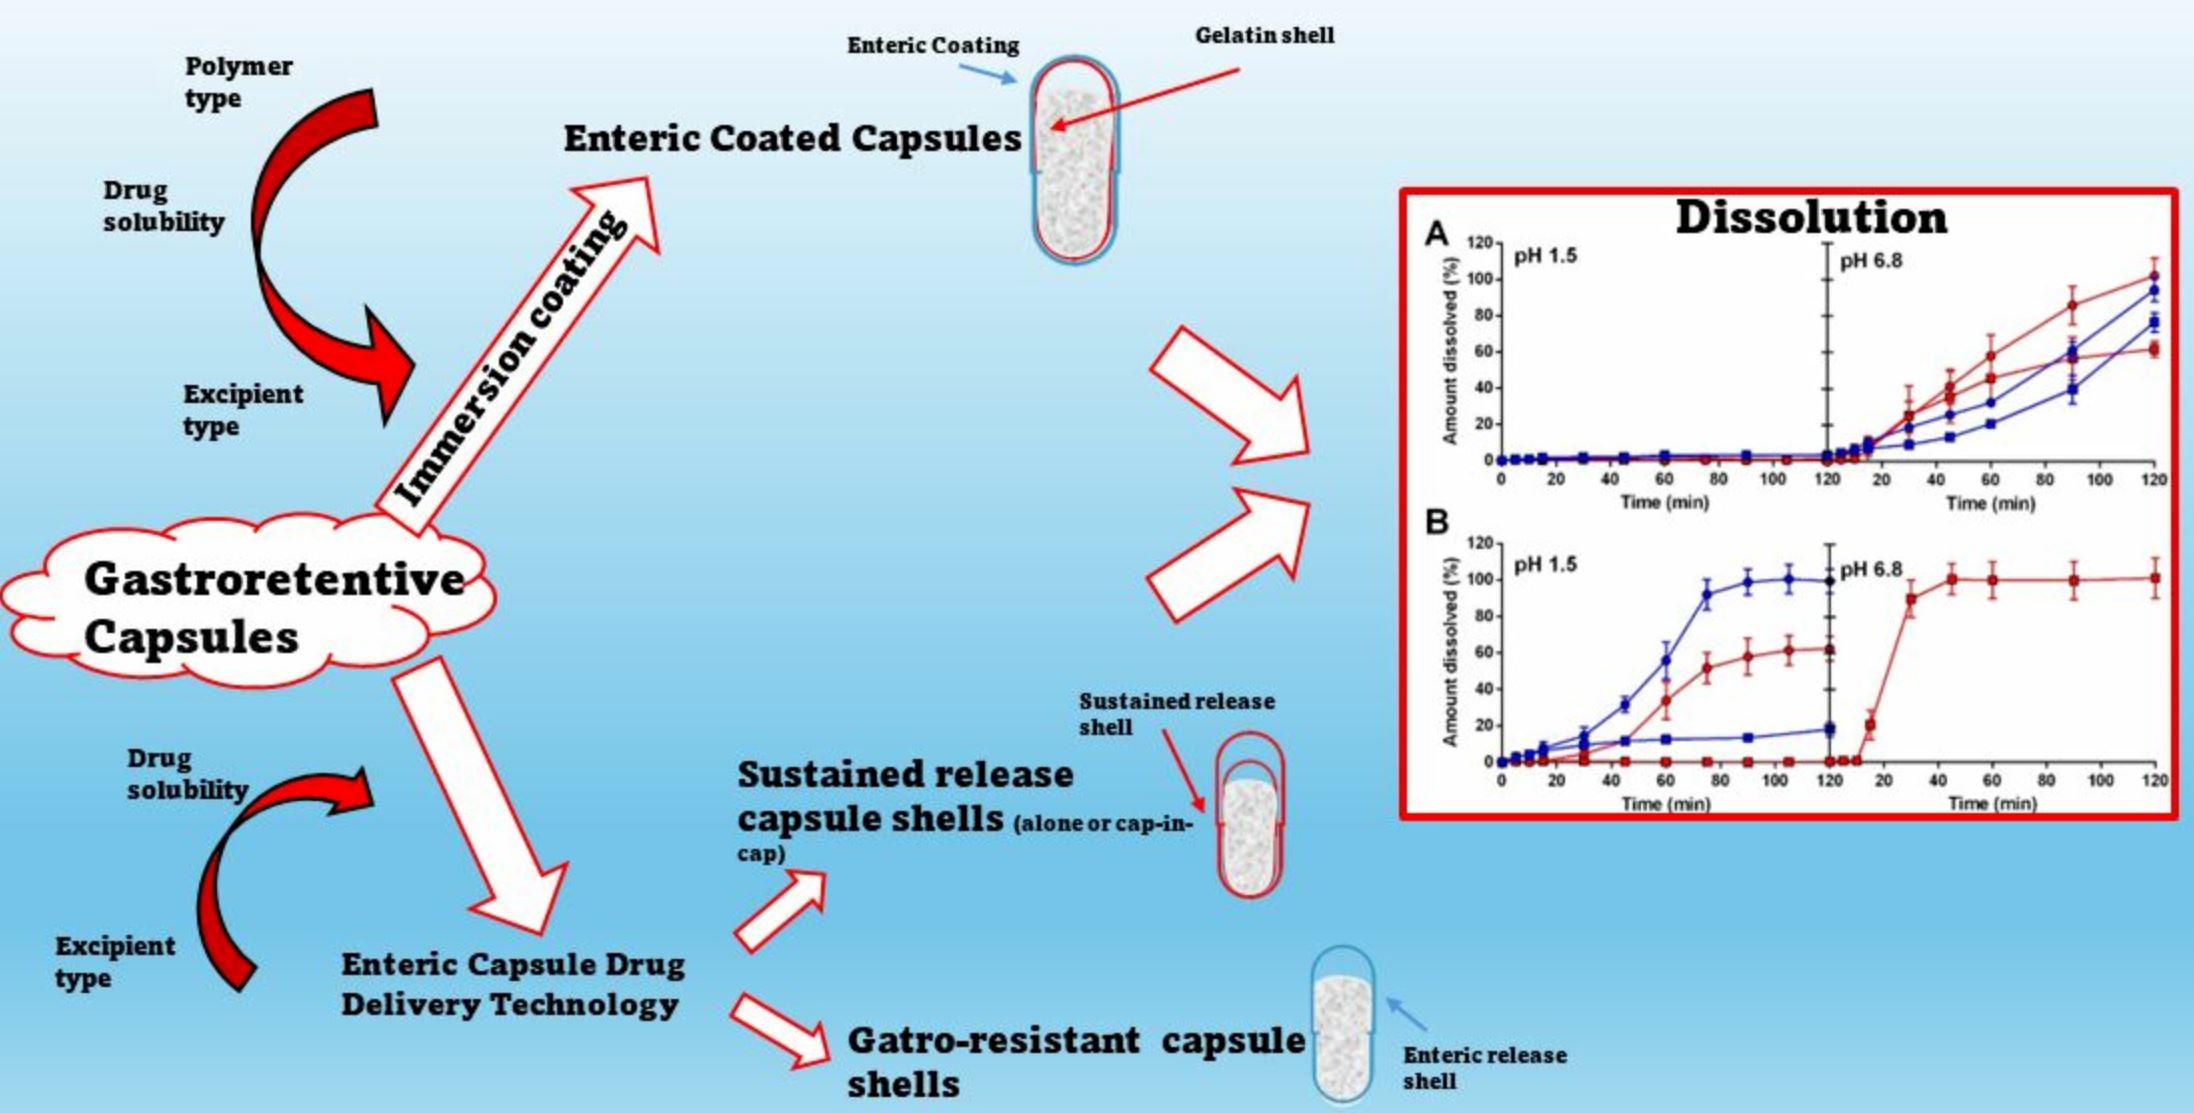 Exploring Immersion Coating as a Cost-Effective Method for Small-Scale Production of Enteric-Coated Gelatin Capsules